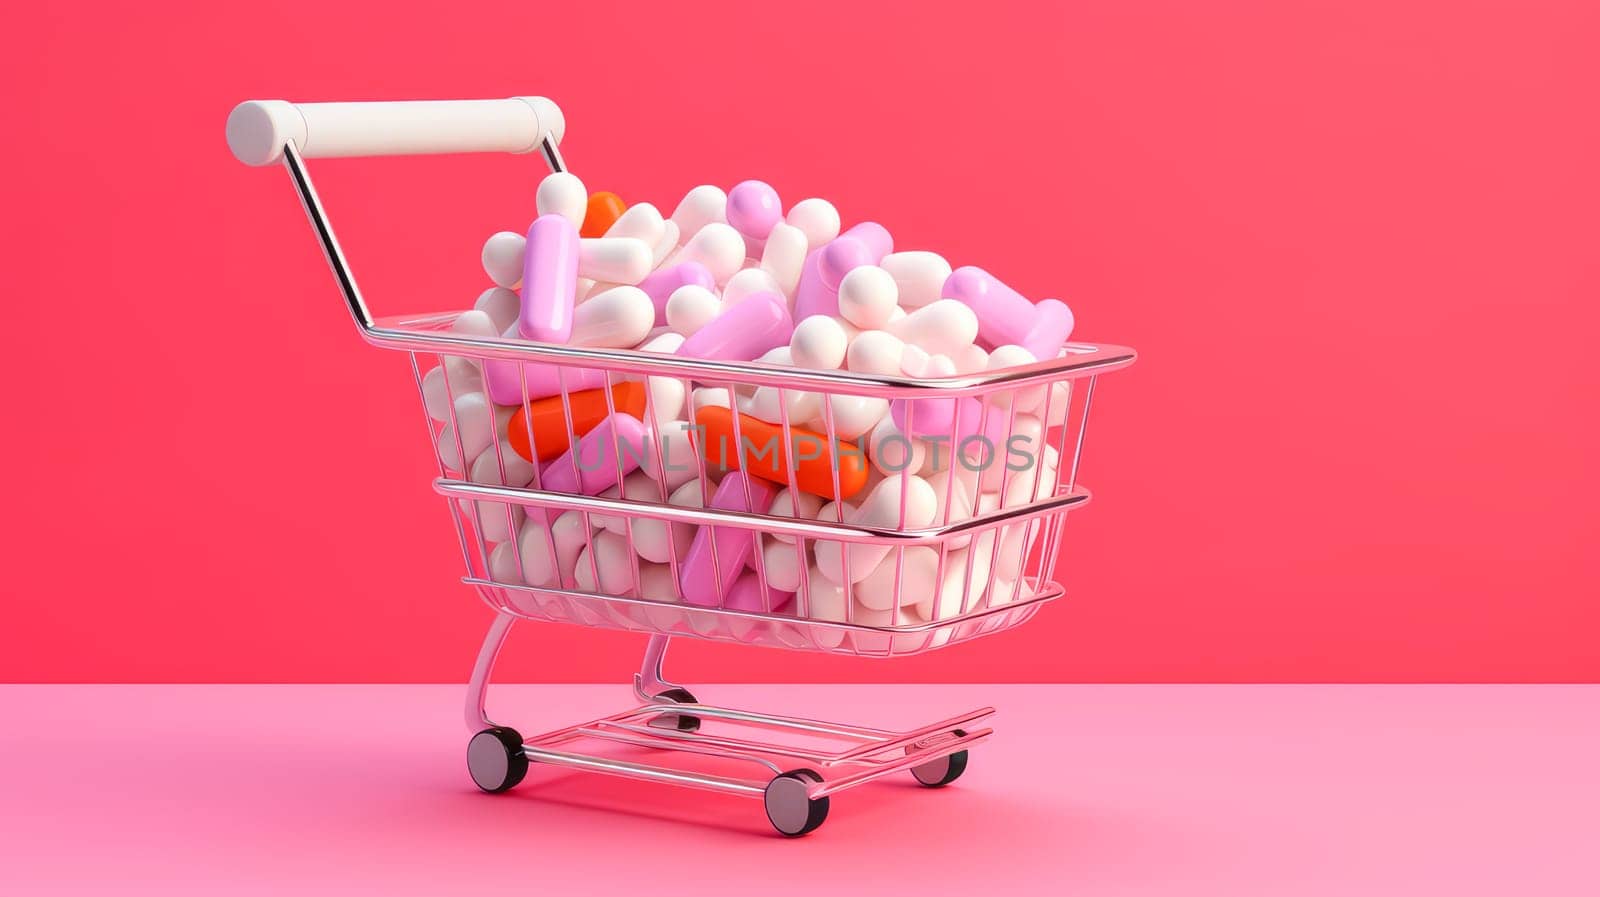 Multi-colored tablets, capsules and vitamins in a jar on a pink background in a shopping cart. by Alla_Yurtayeva